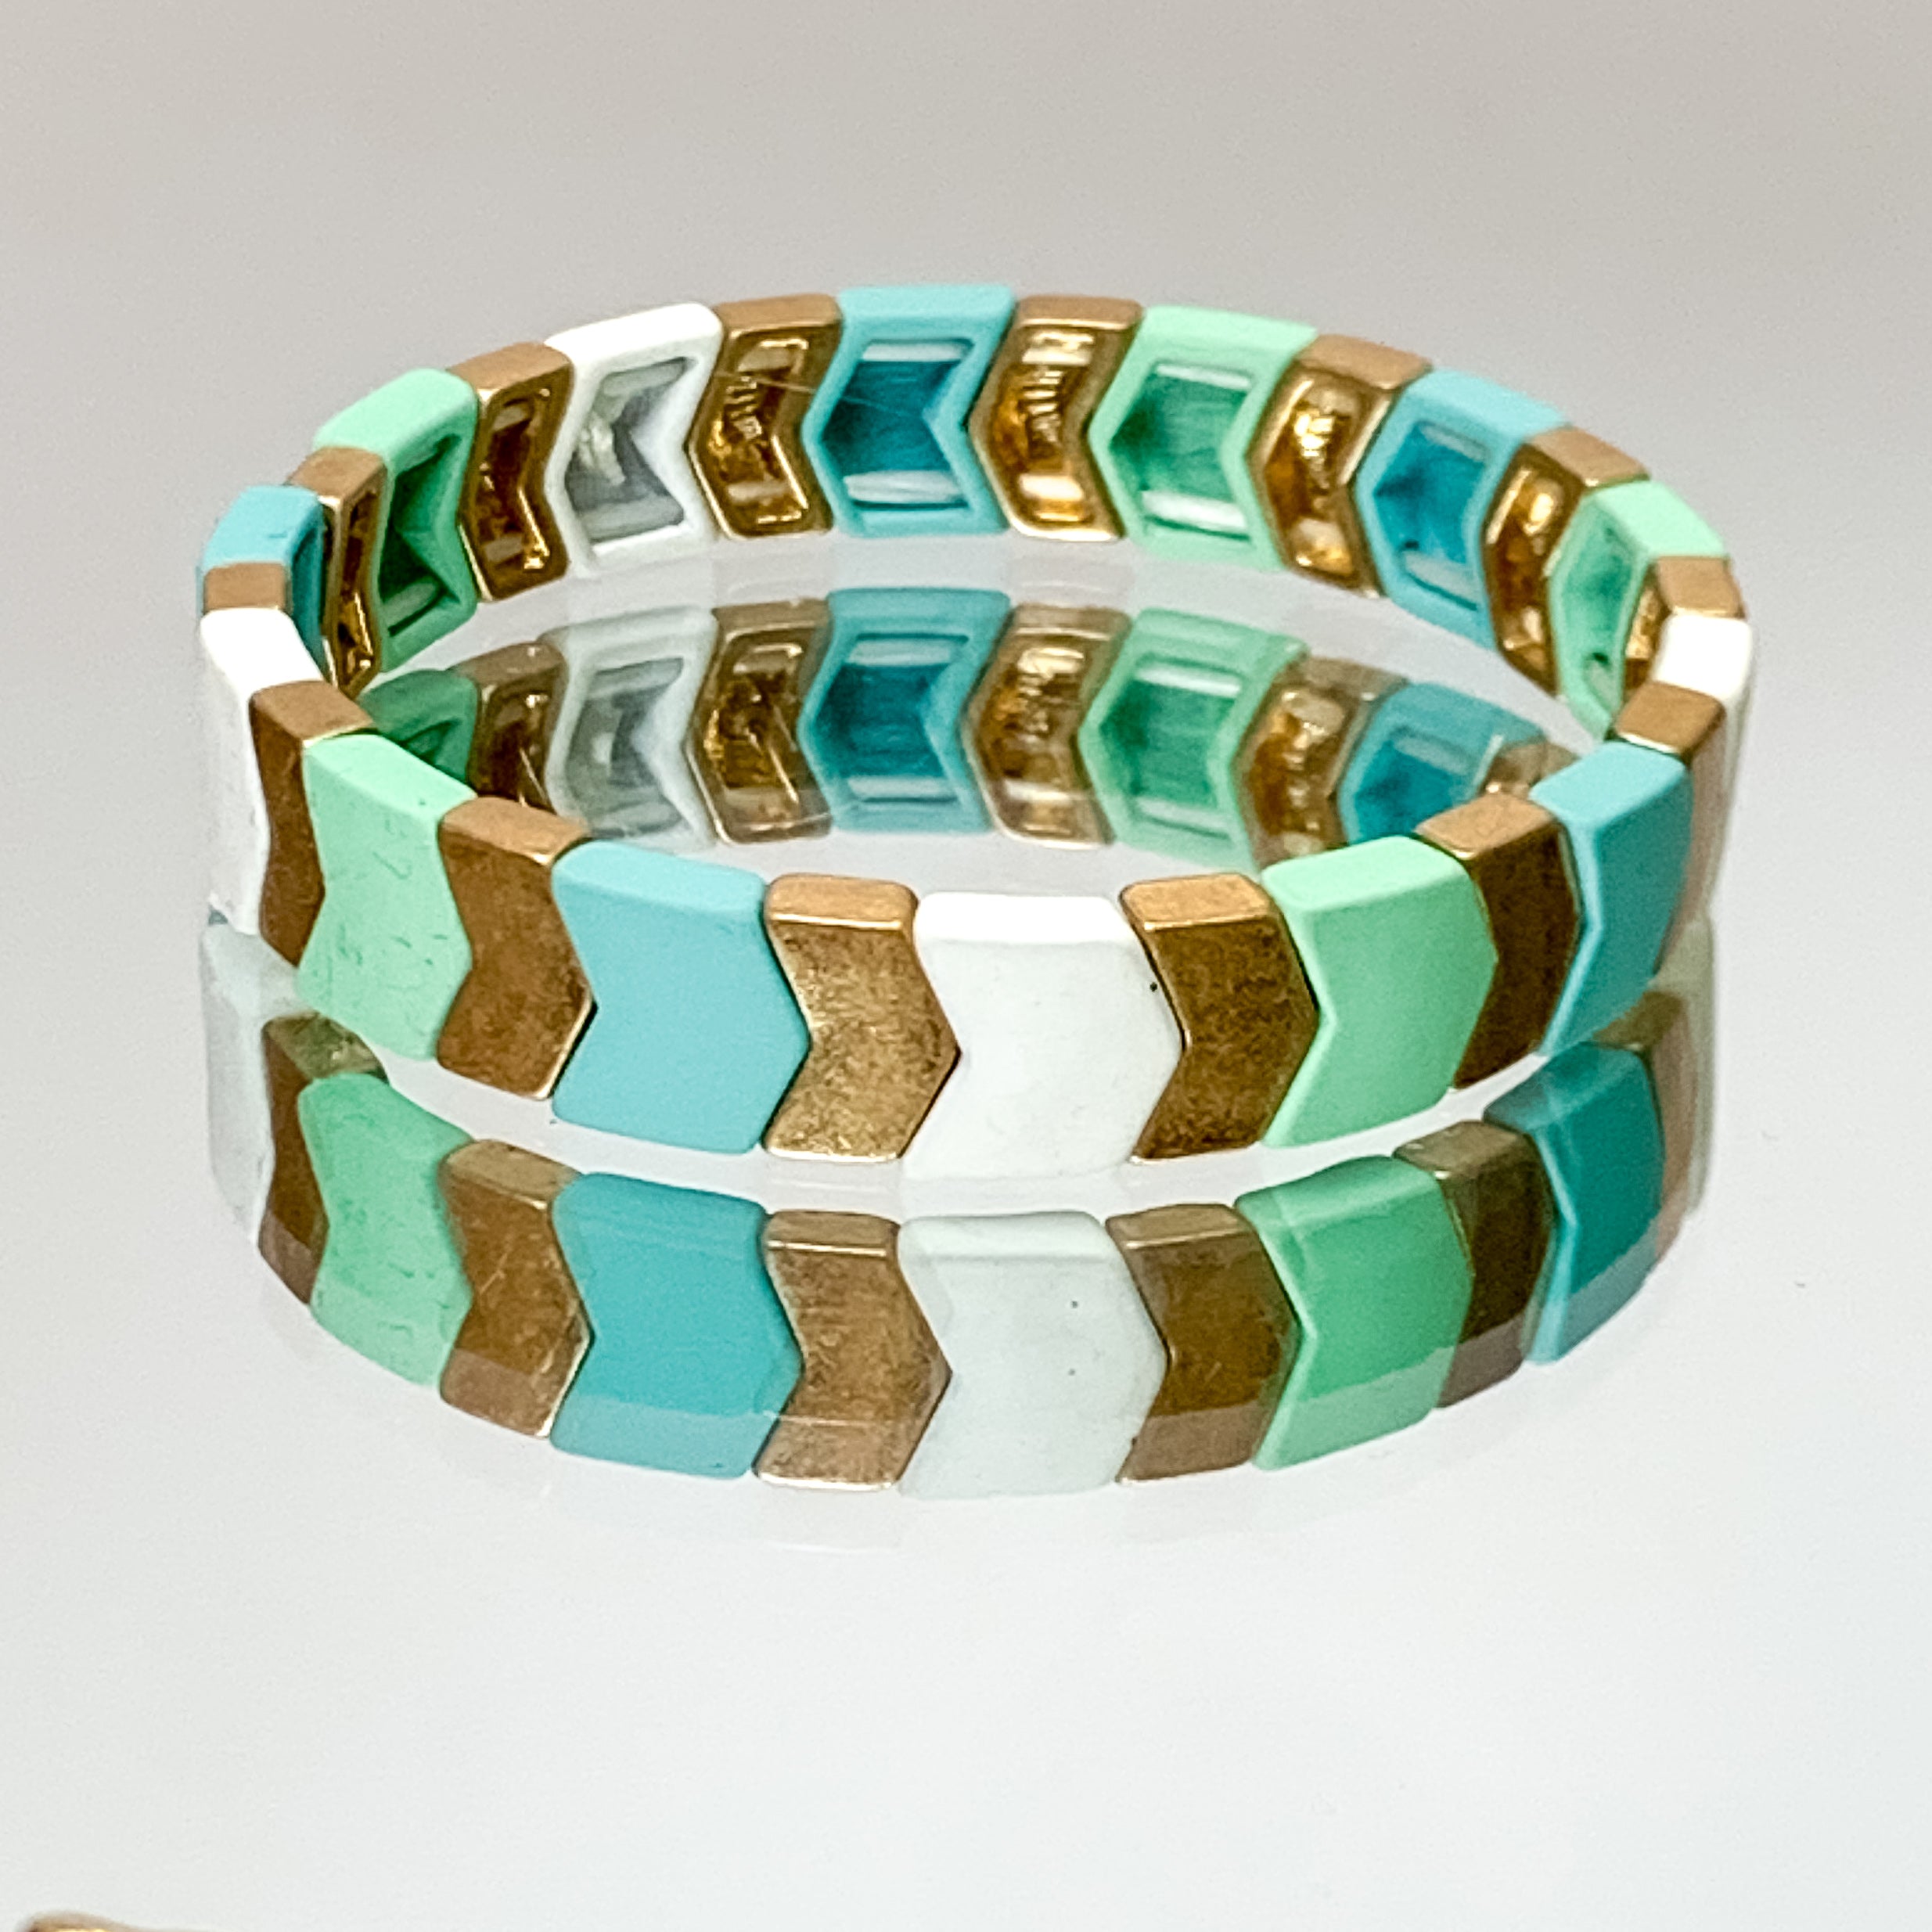 All About Matte Chevron Bracelet in Turquoise - Giddy Up Glamour Boutique